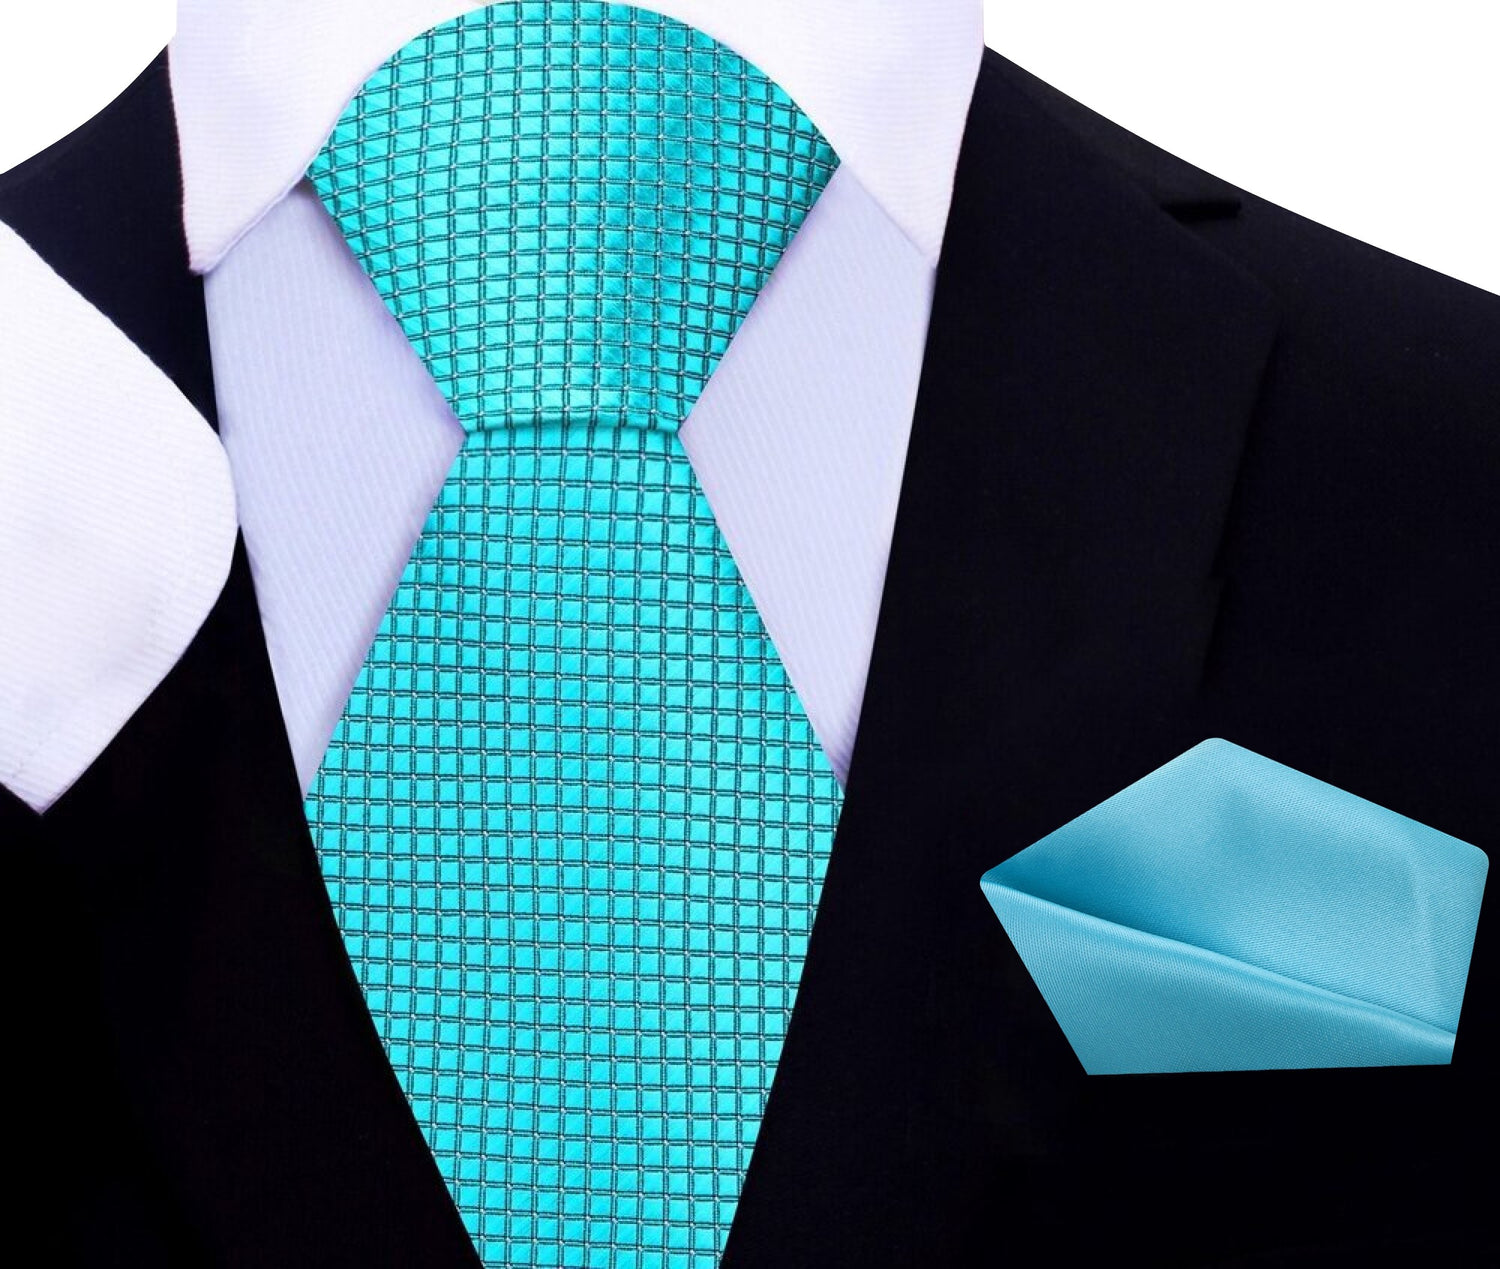 Deion "PRIME TIME" Sanders Bright Teal Geometric Tie and Accenting Square||Bright Teal